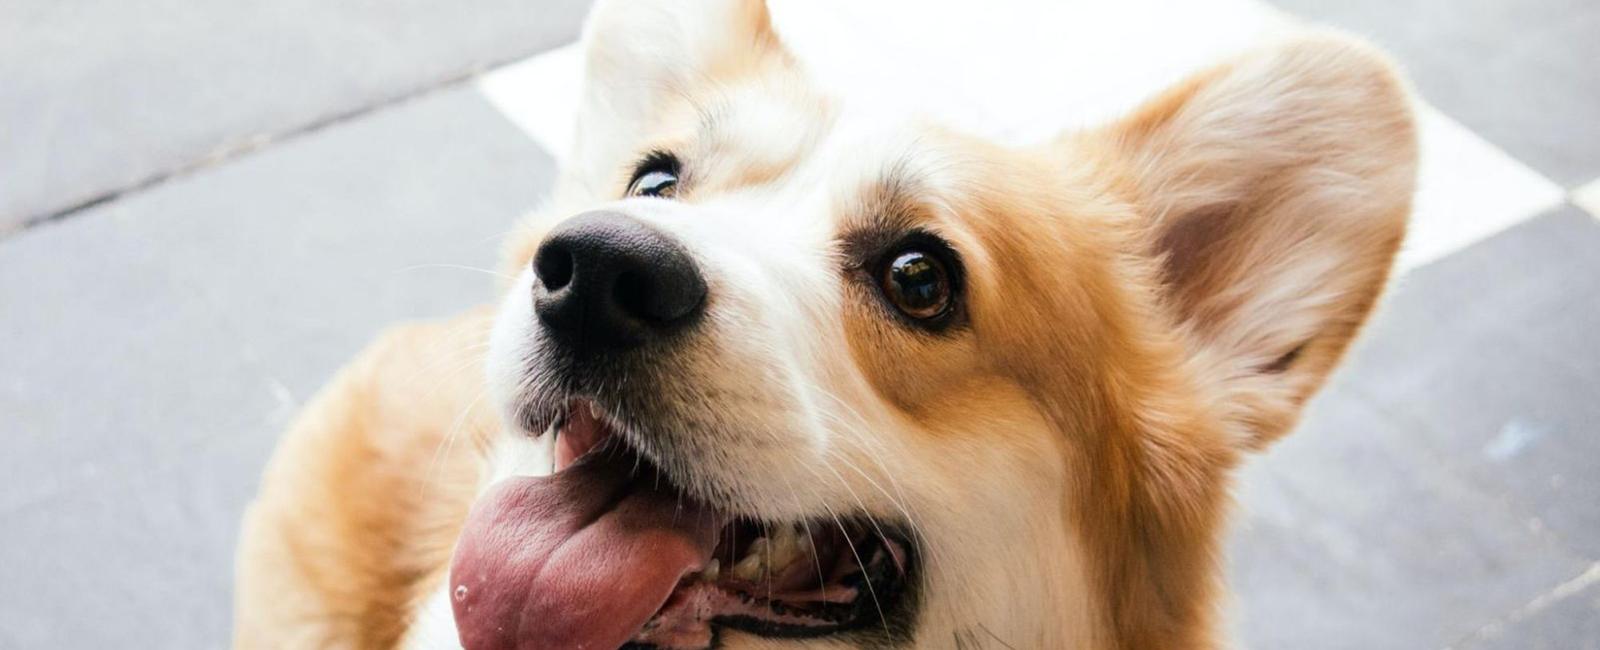 Dog Panting in Crate? Here's Why & What to Do About It